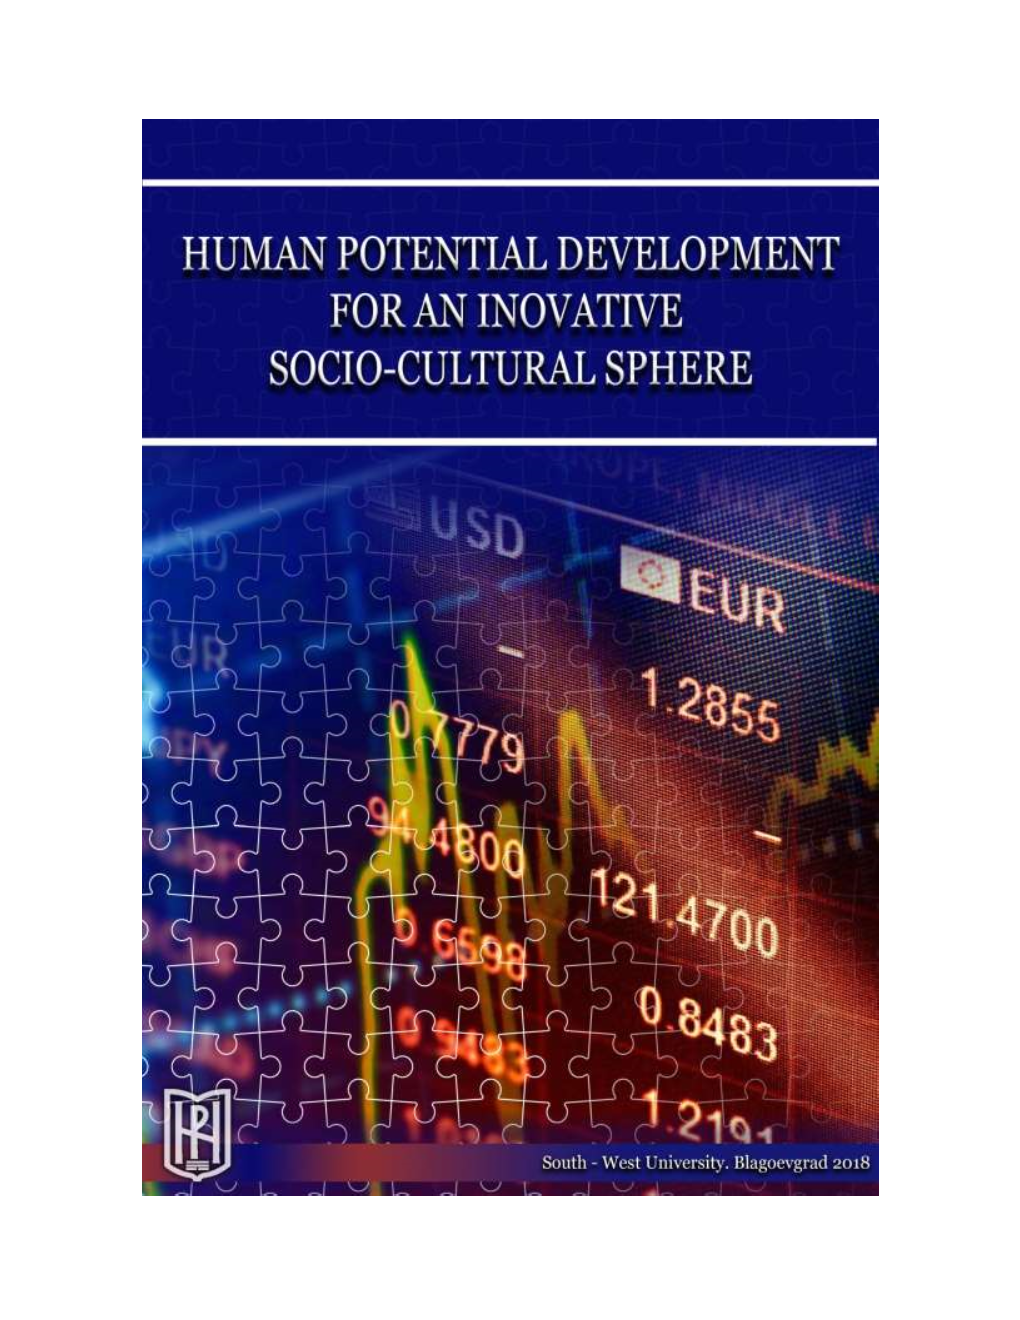 Human Potential Development for an Innovative Socio-Cultural Sphere